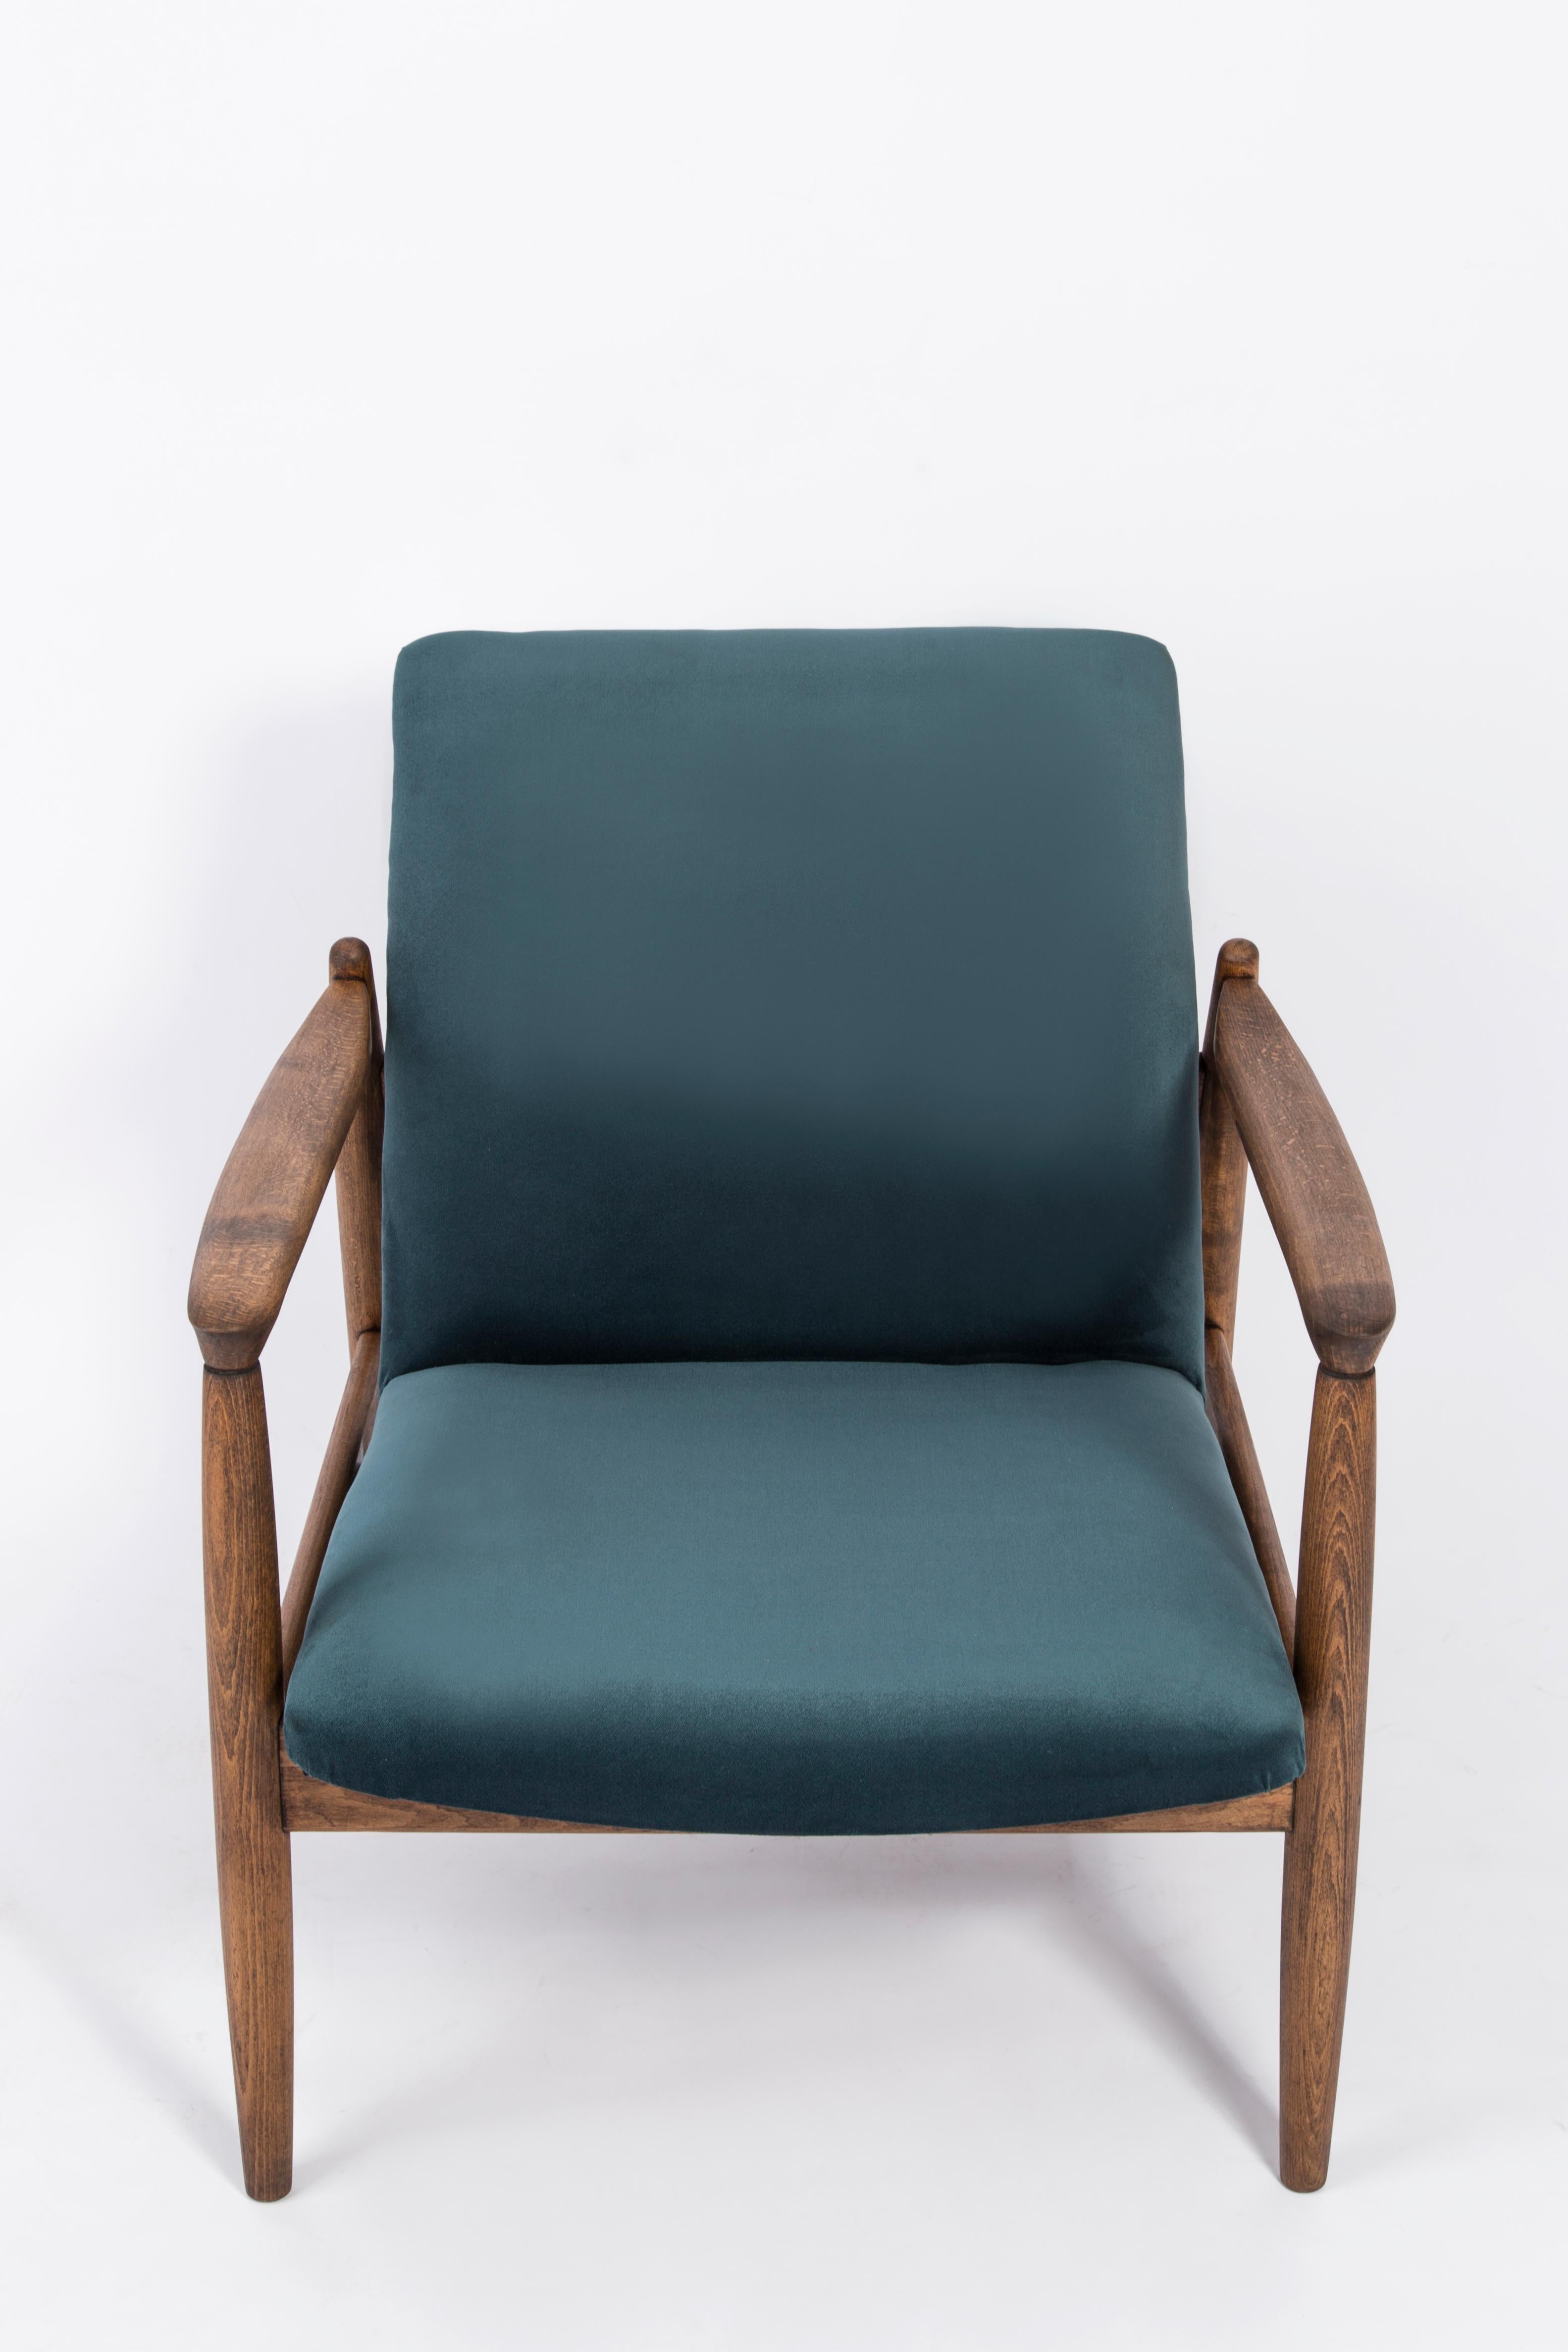 Pair of Petrol Blue Armchairs, Edmund Homa, 1960s For Sale 1